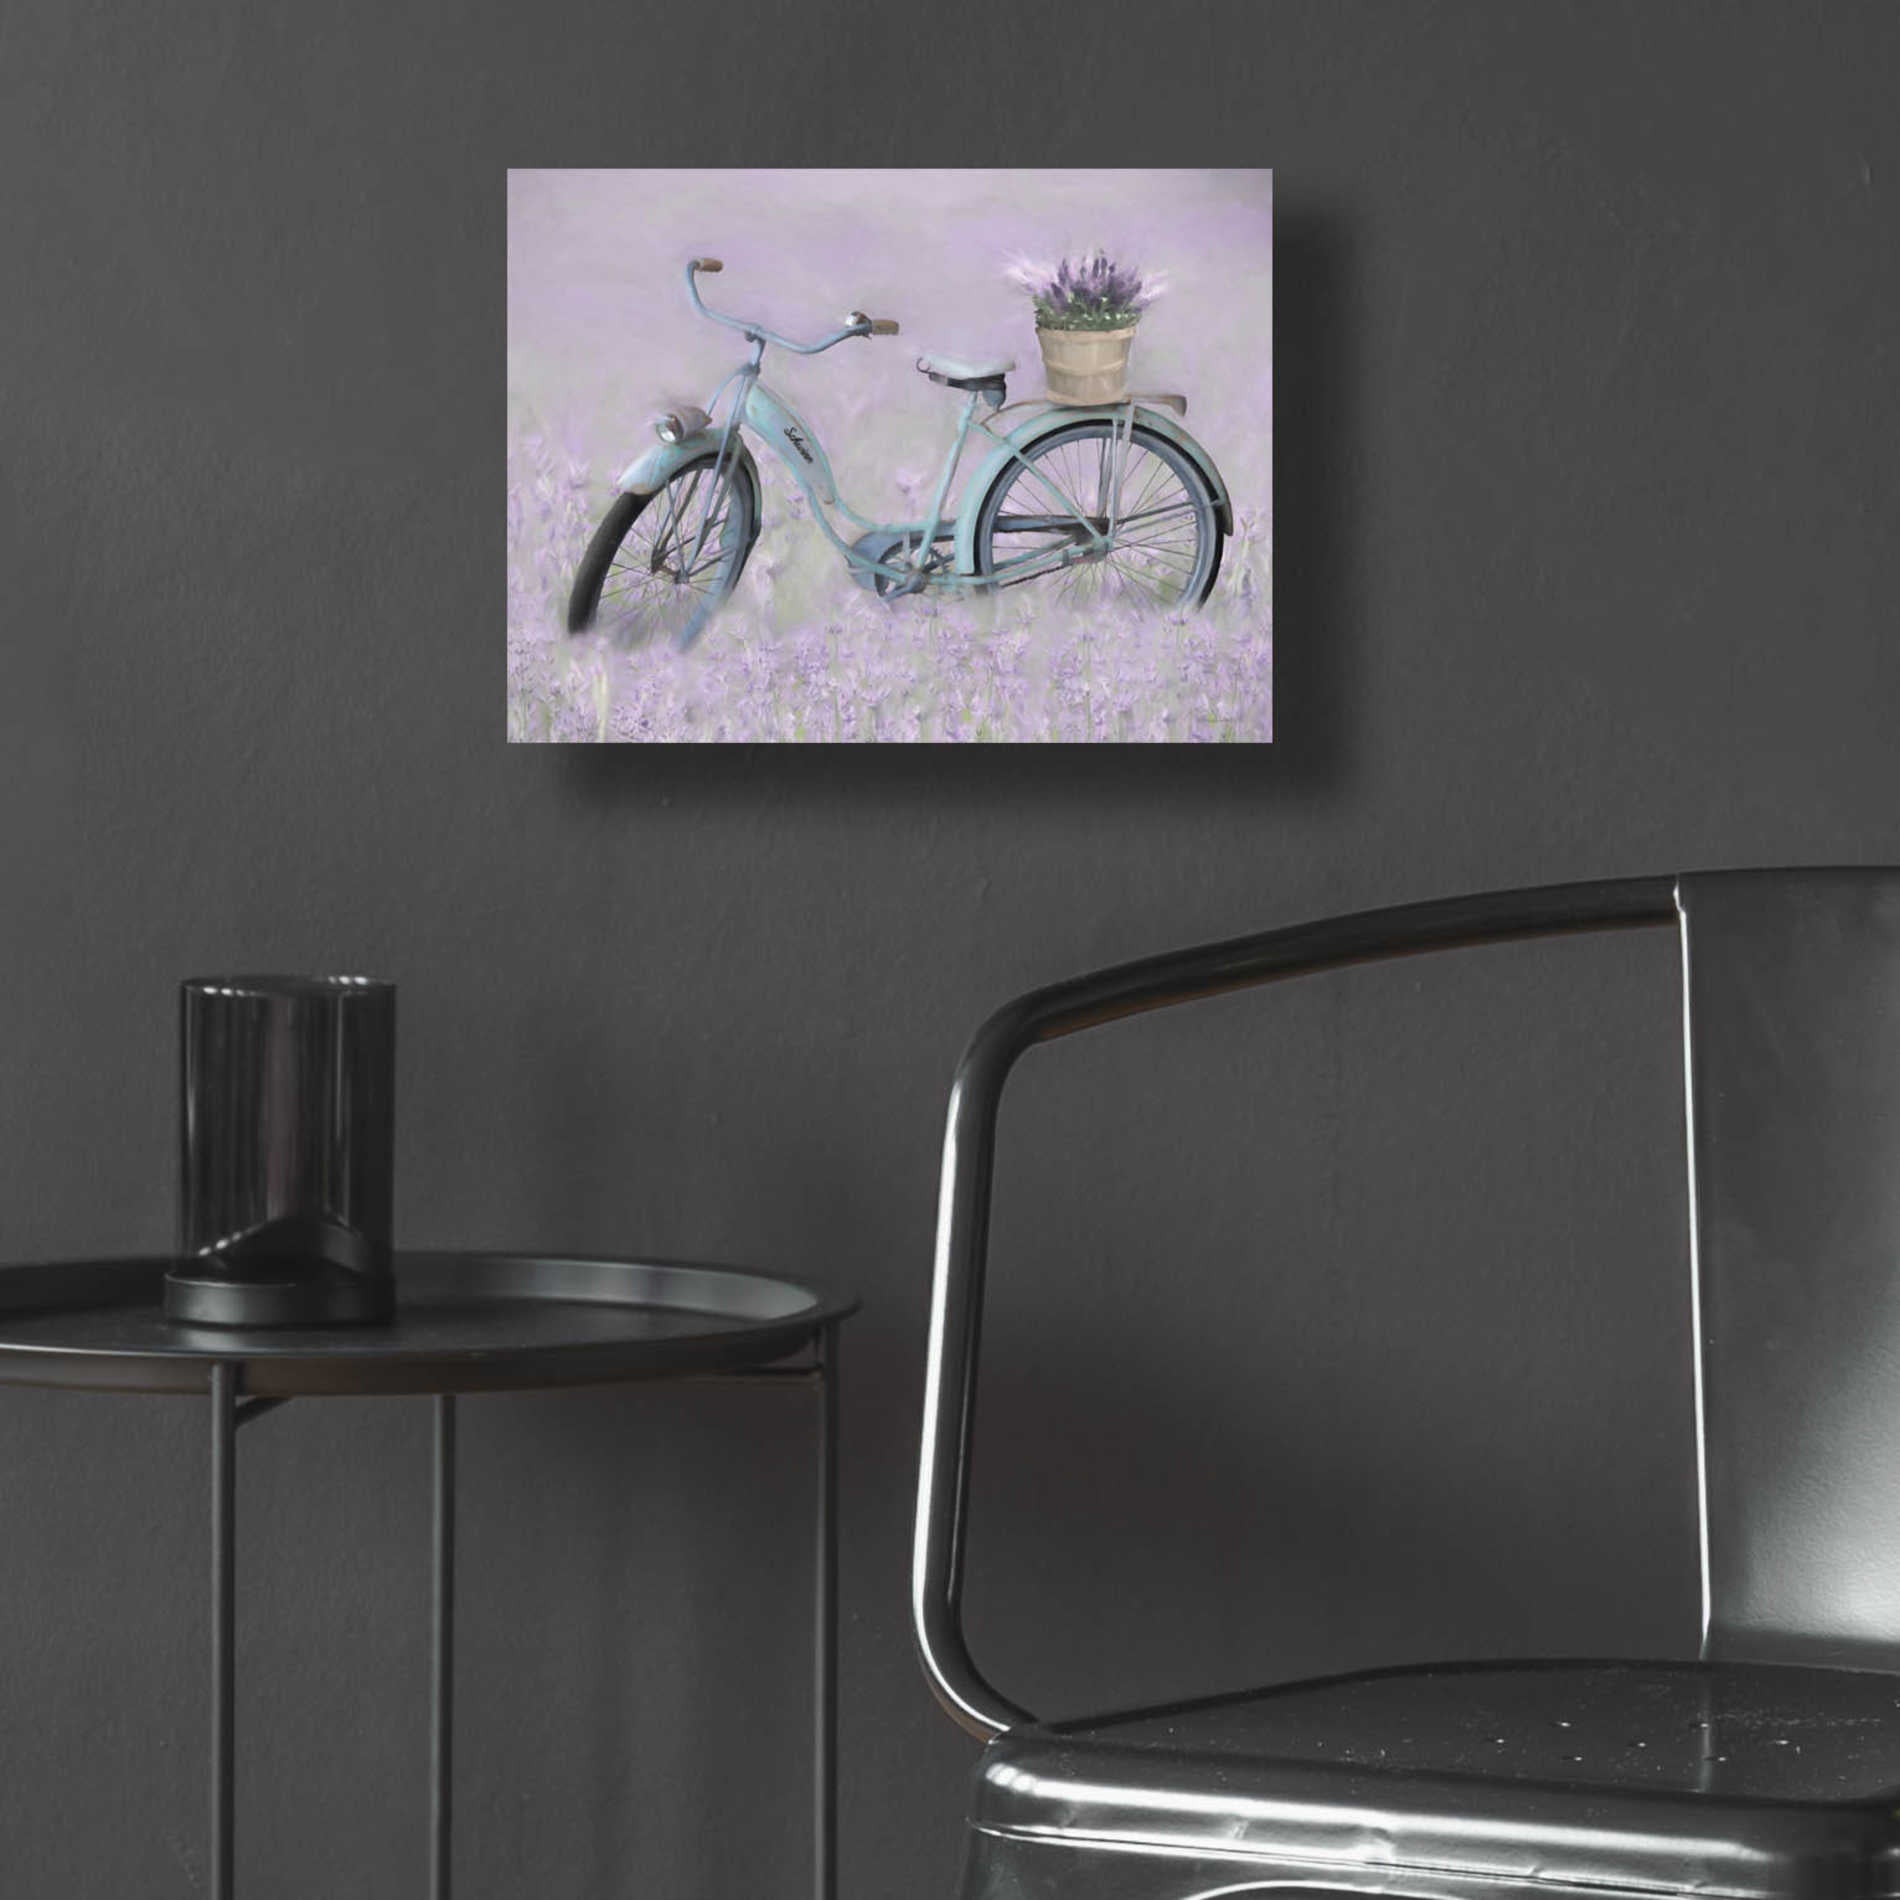 Epic Art 'Bicycle in Lavender' by Lori Deiter Acrylic Glass Wall Art,16x12